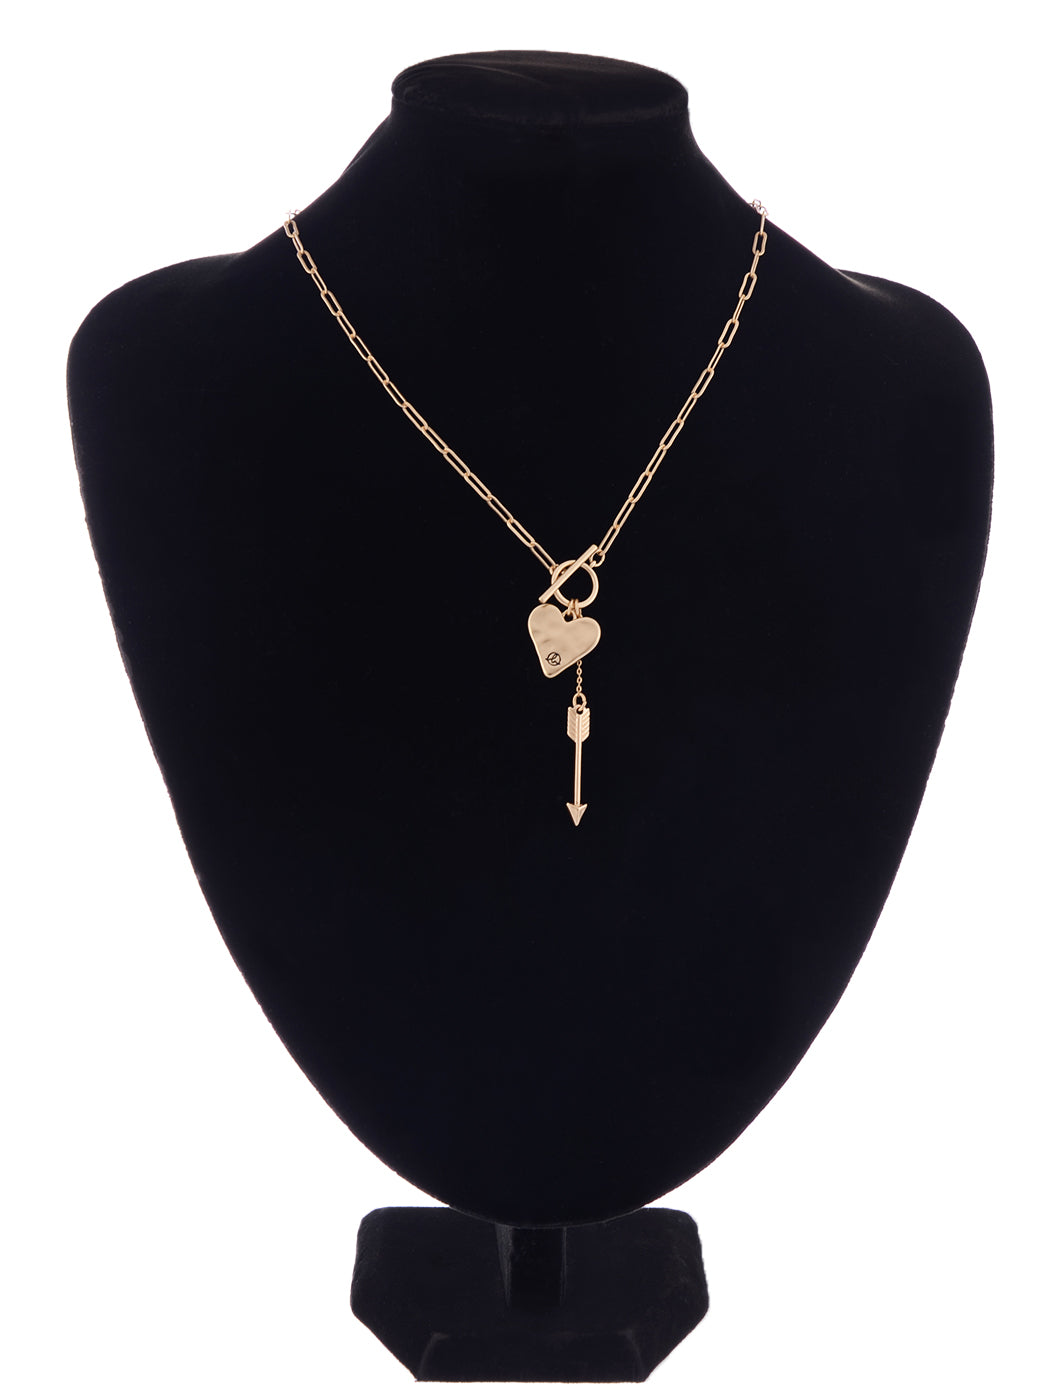 Alilang Love Heart Necklace With Hanging Arrow Birthday Gifts for Women